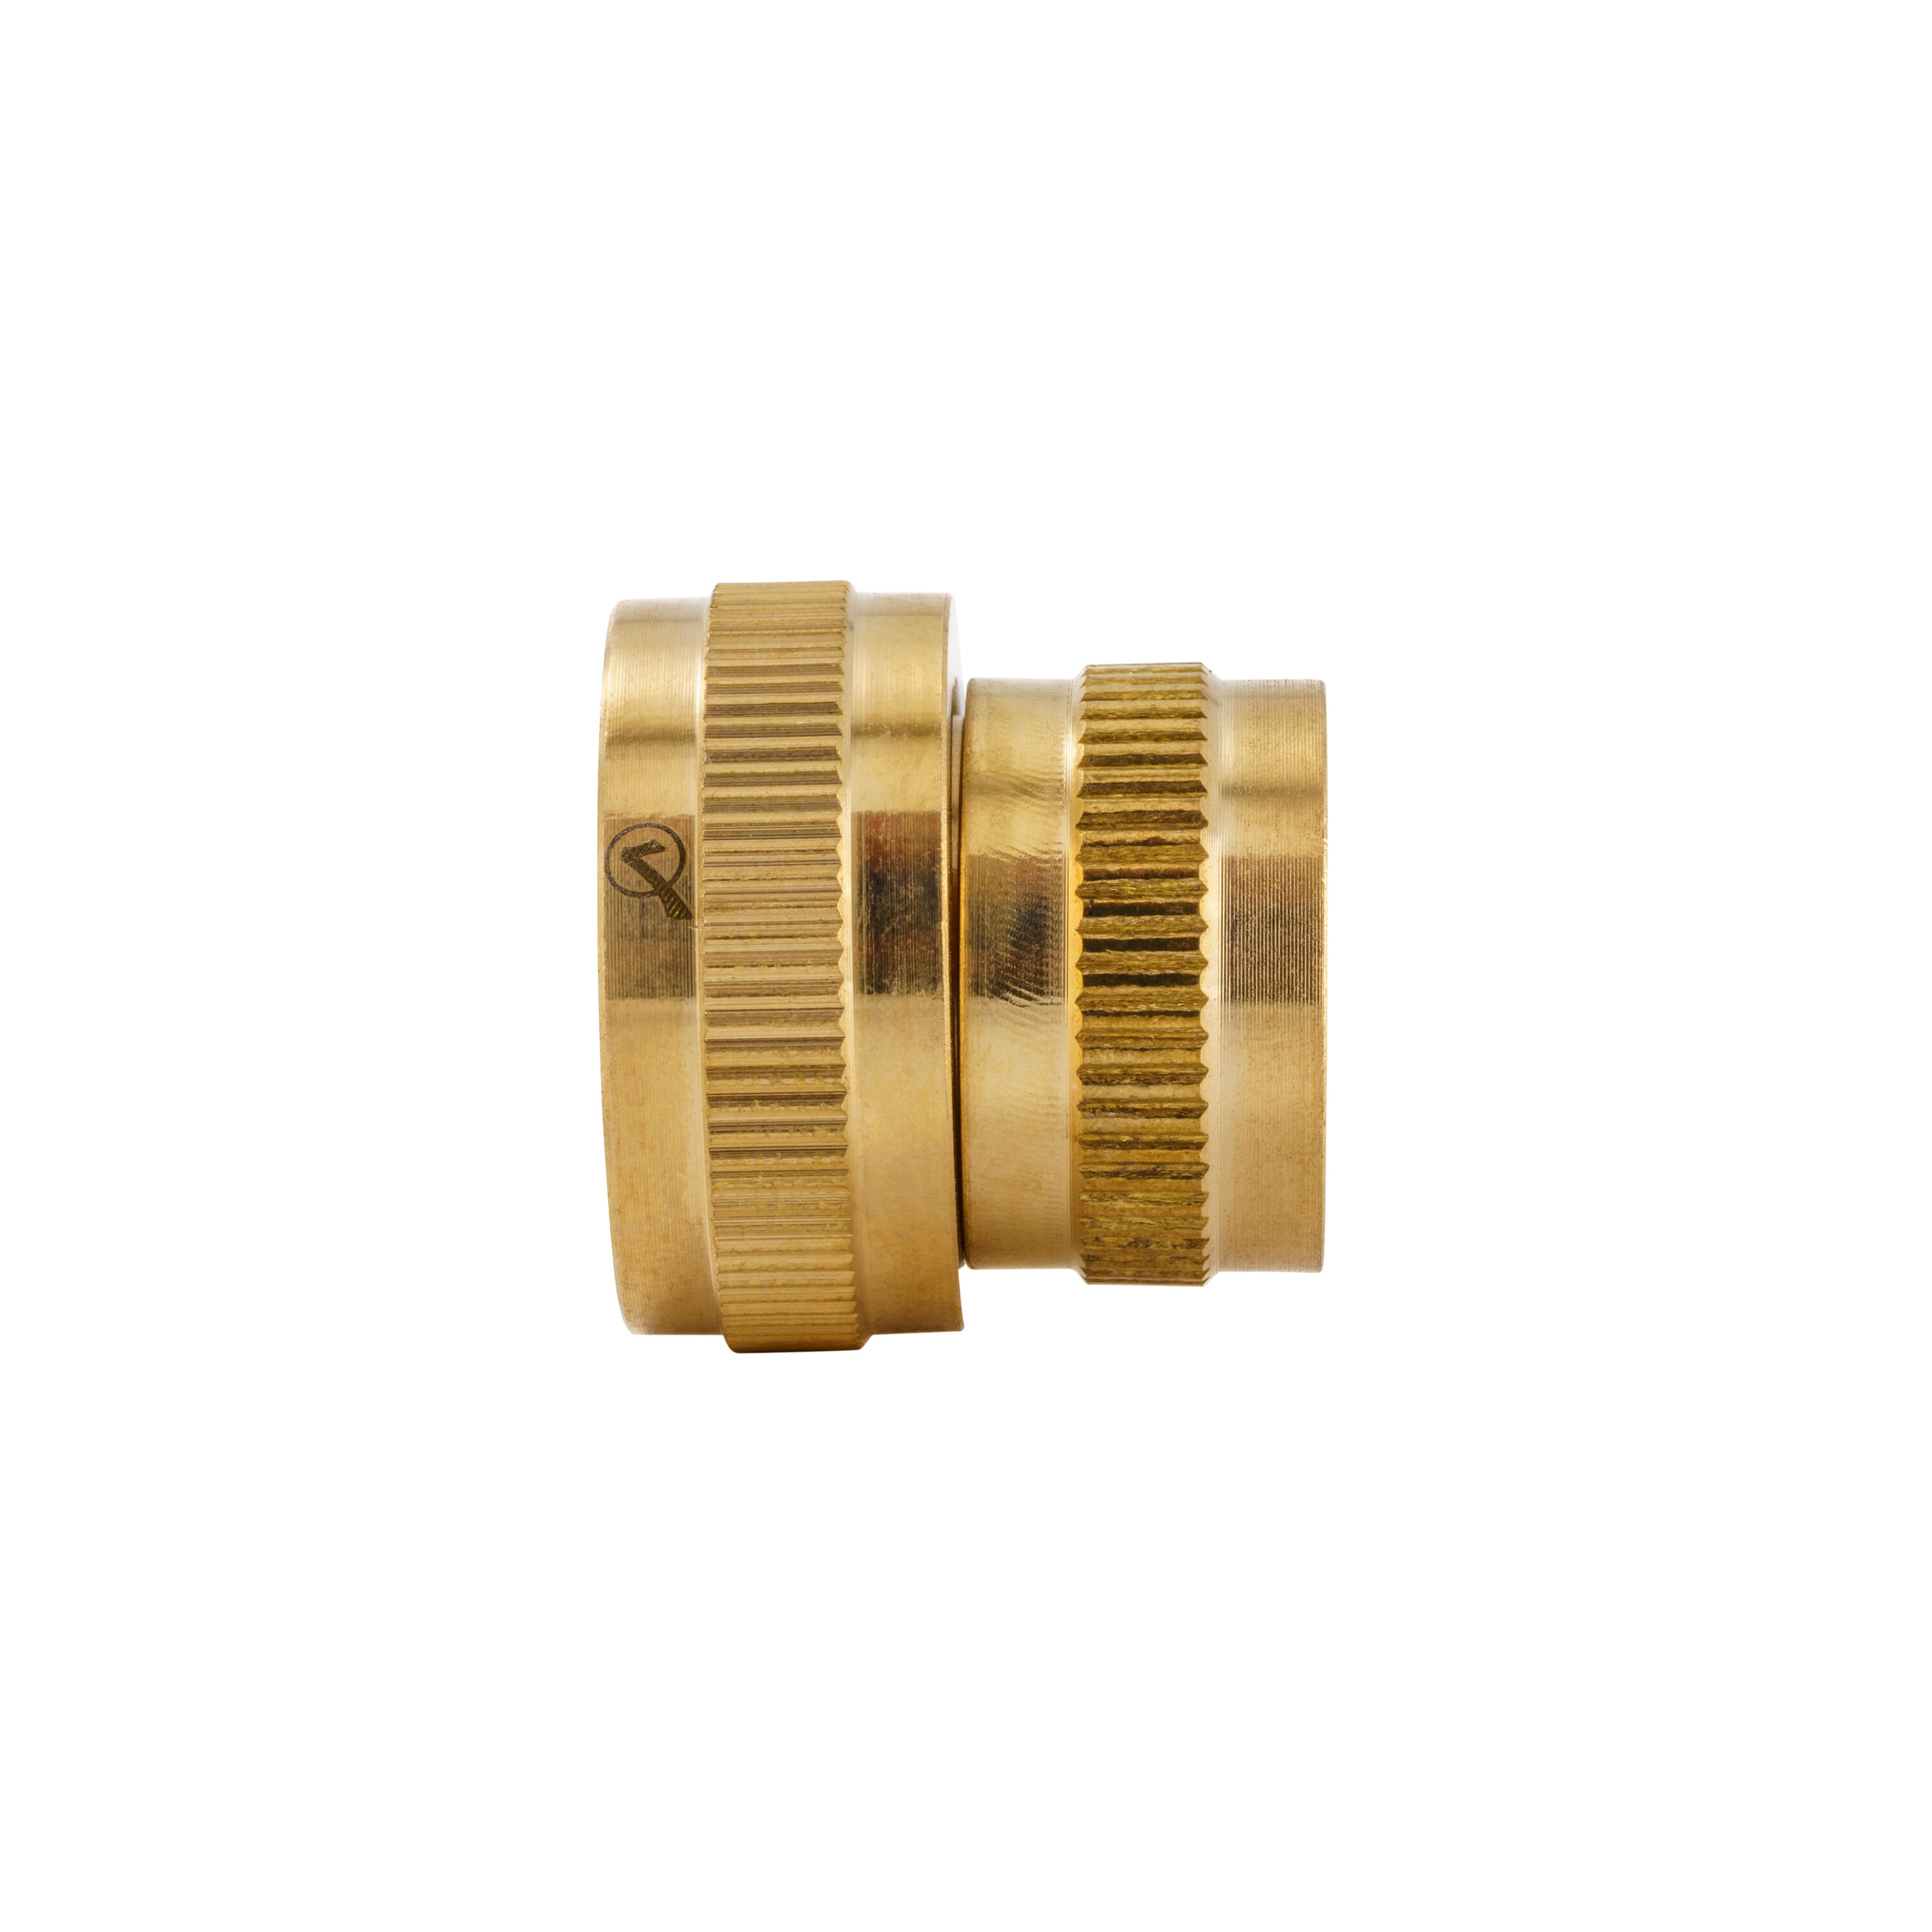 Adapter Nipple 3/4 Male X 1 “ Female Pipe Fitting NPT - Brass Adapter 3/4  Inch